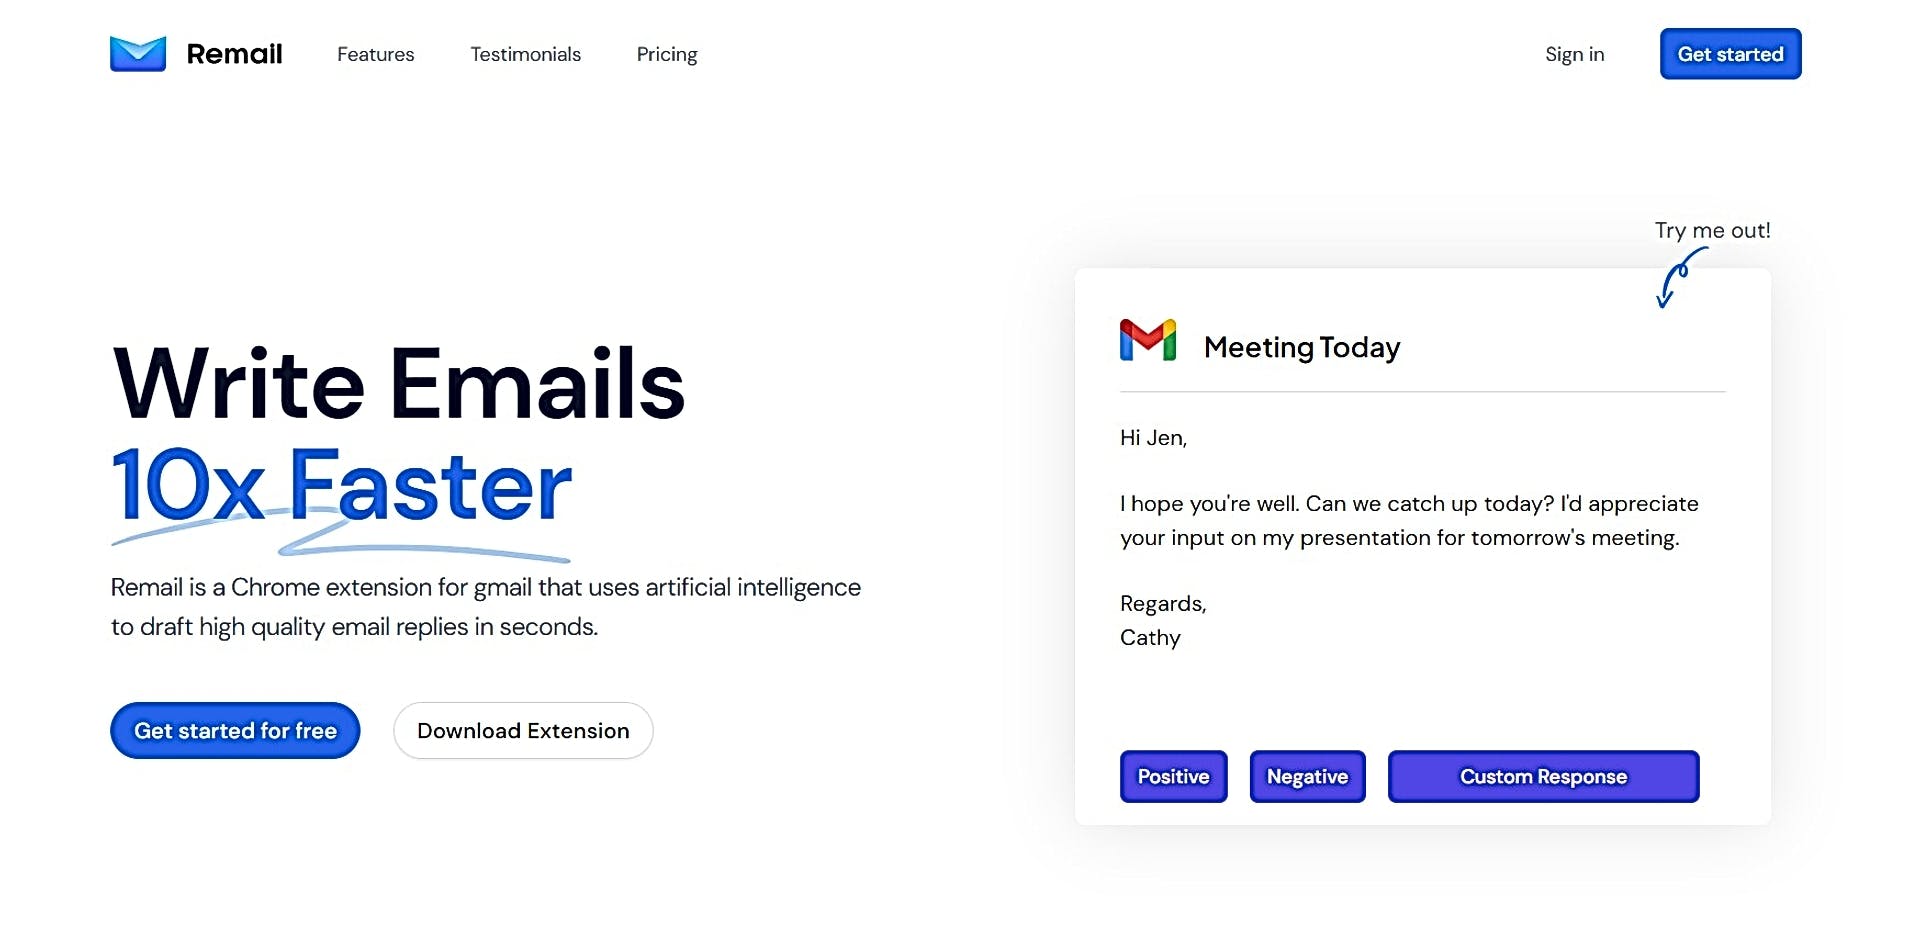 Remail featured